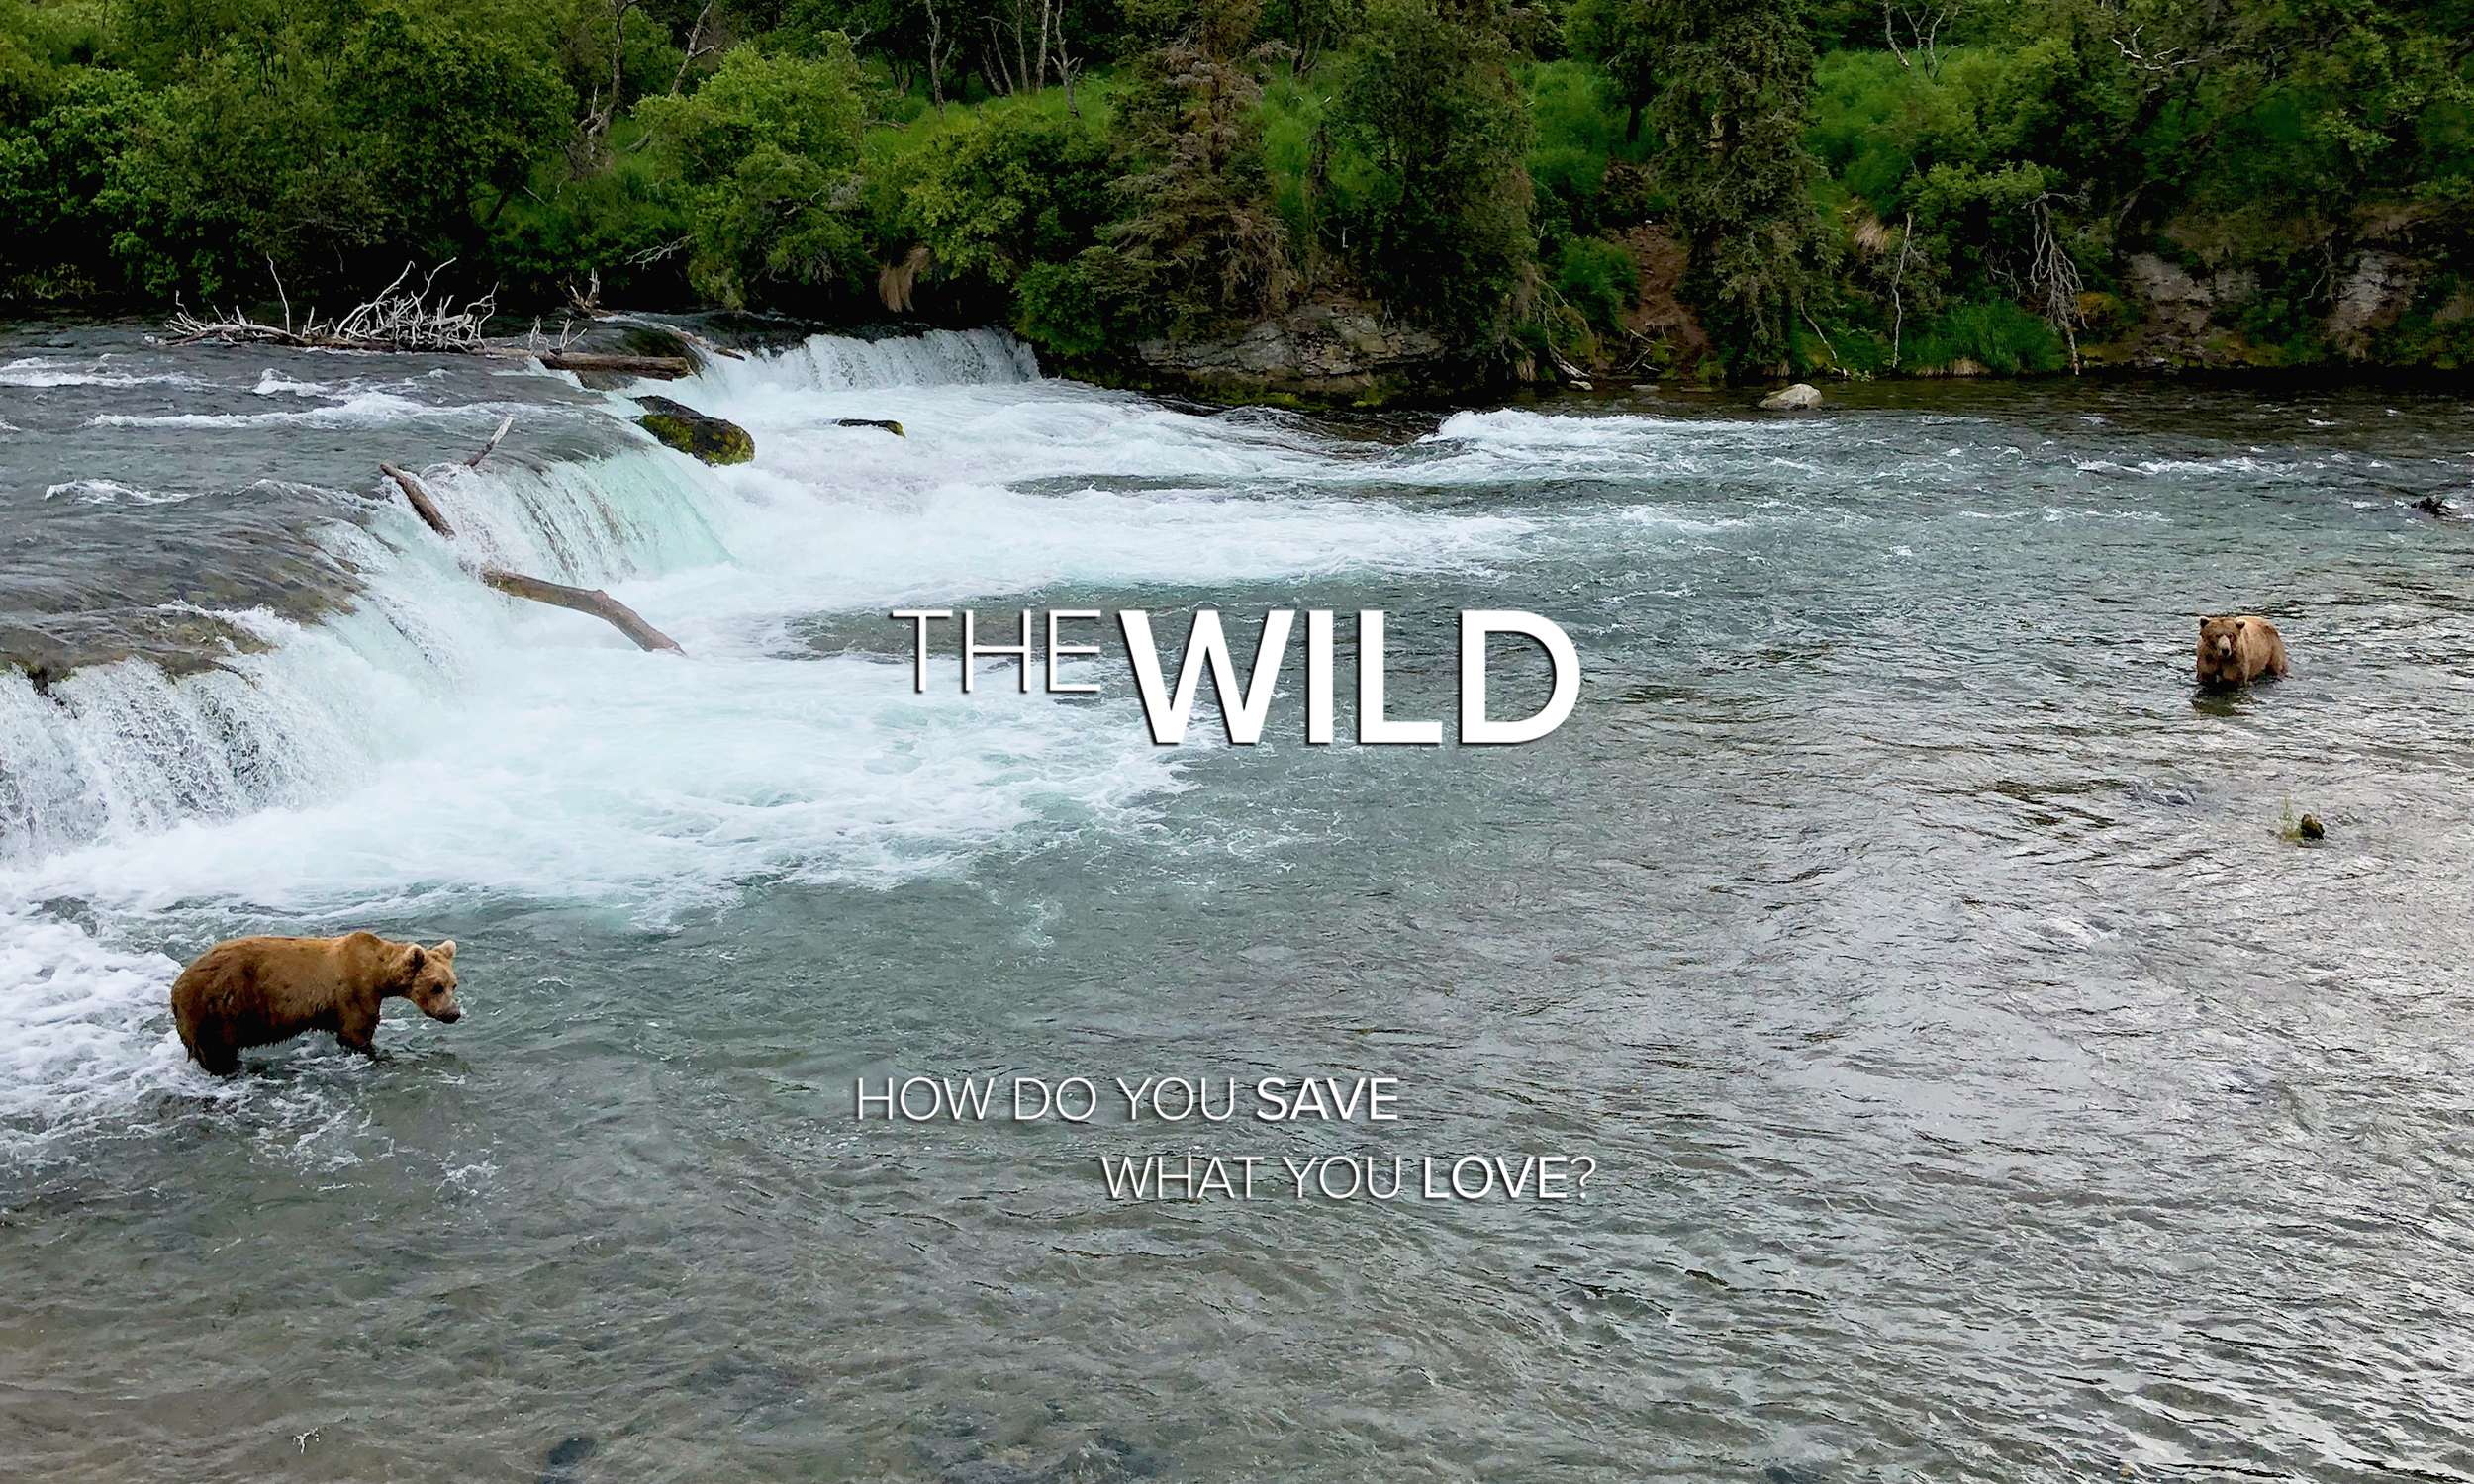 The Wild: How do you save what you love?